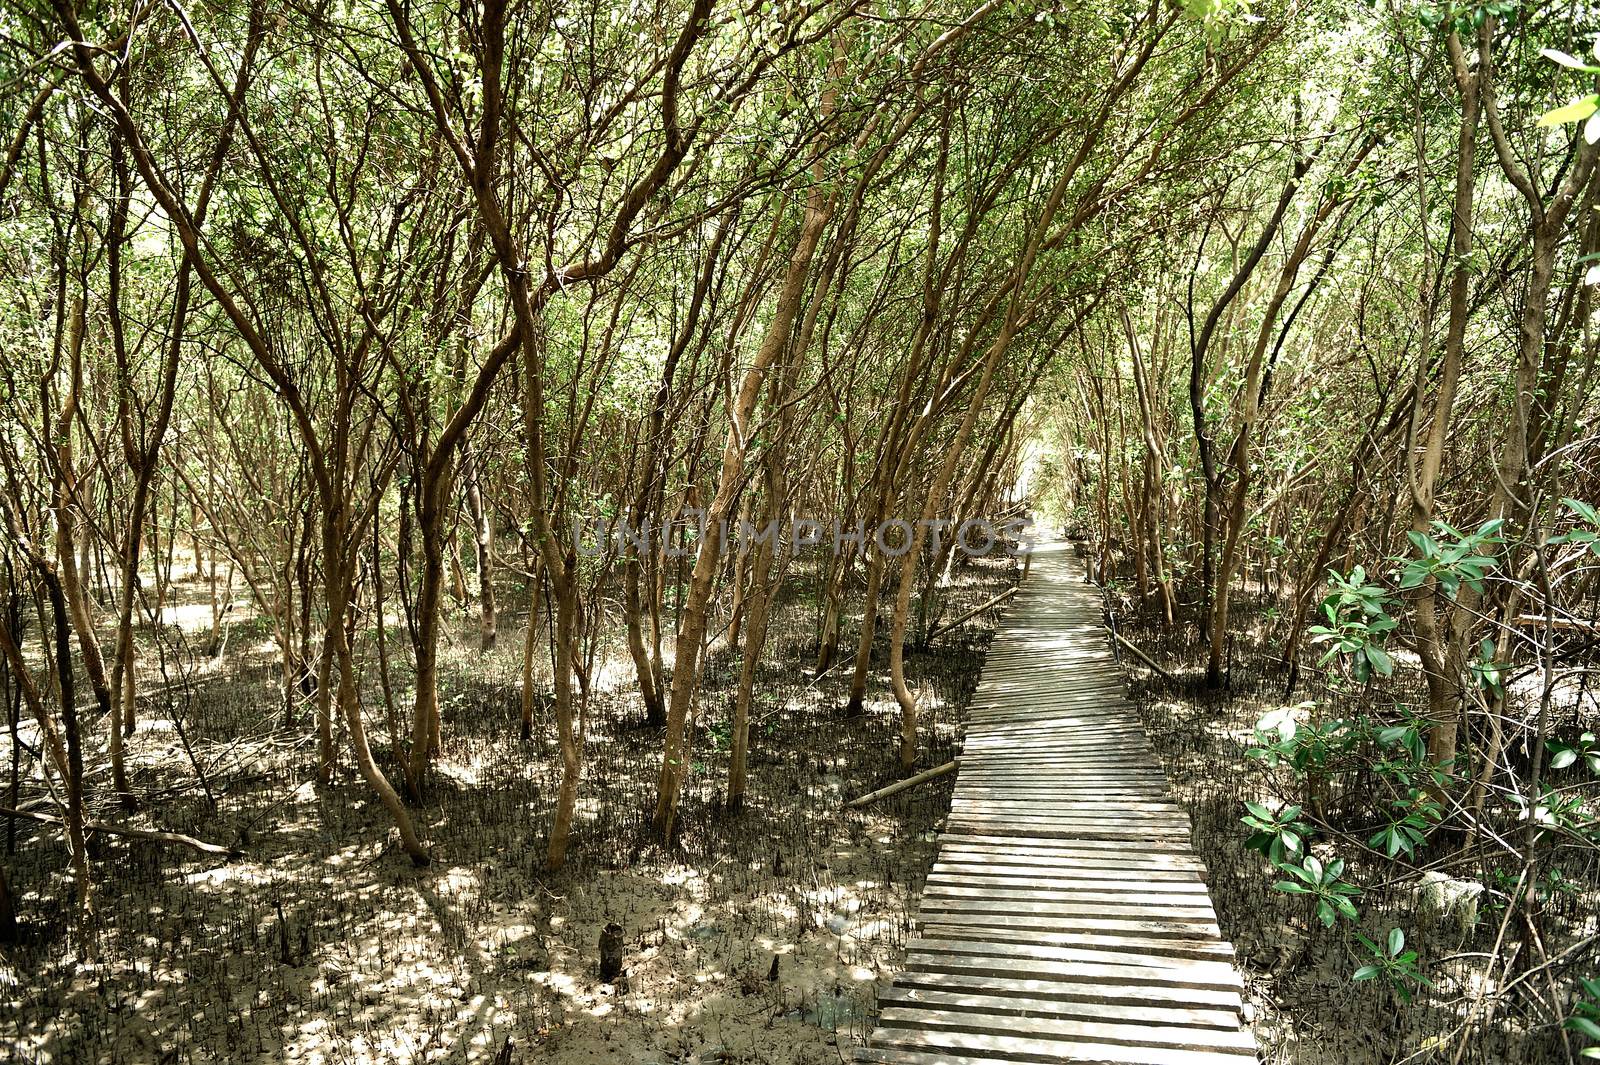 The boardwalk in the mangrove forest of thailand. by think4photop